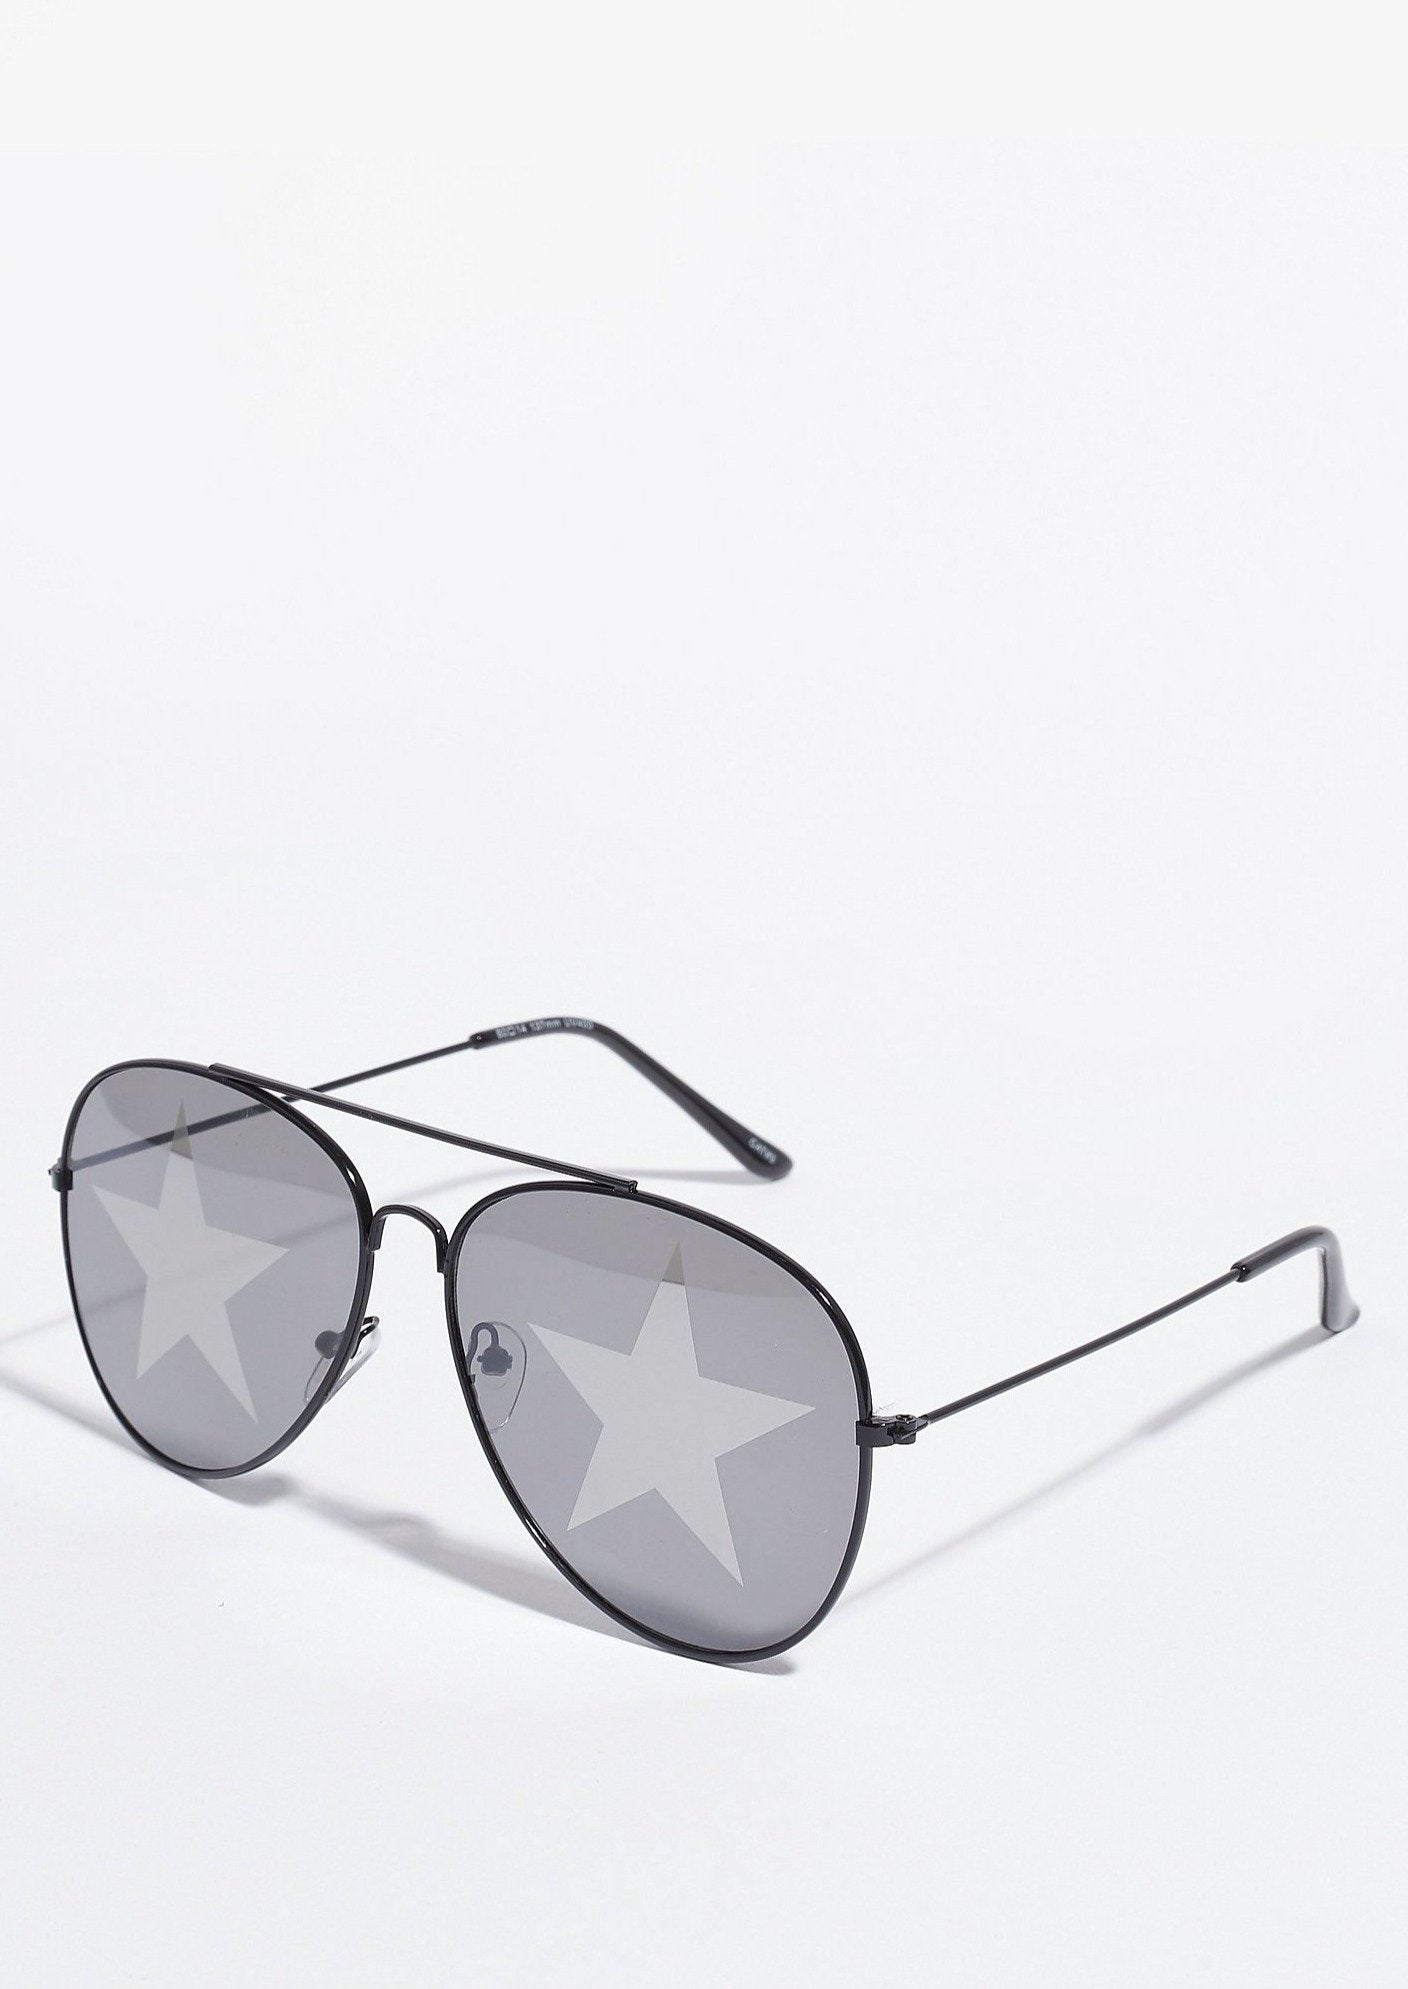 STARRY-EYED SUNGLASSES - The Glow Hous